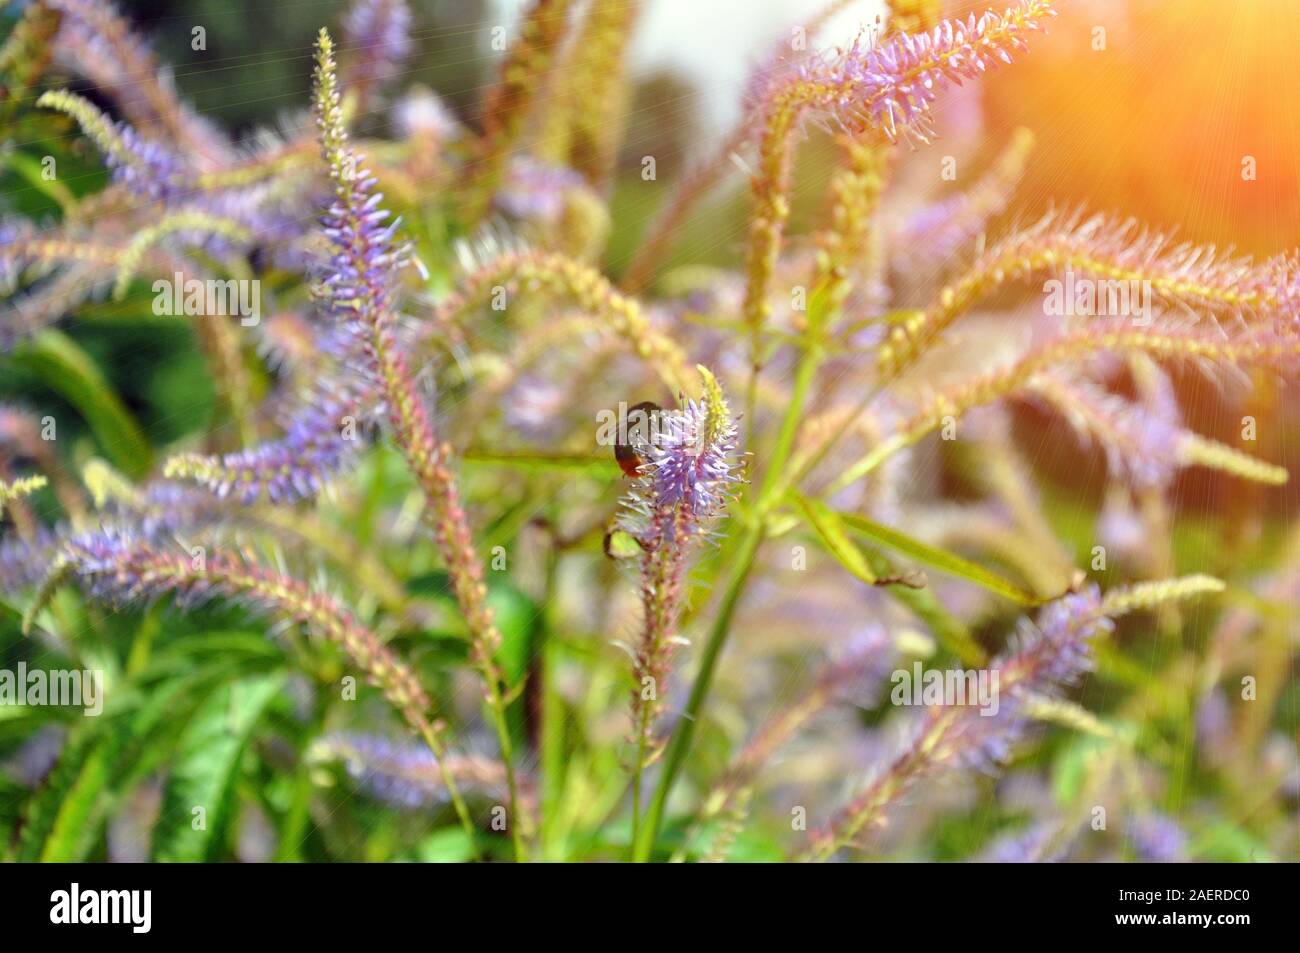 The blue flower of the garden plant Veronicastrum Virginicum Rosea, native to Canada and the USA. Bumblebee Stock Photo